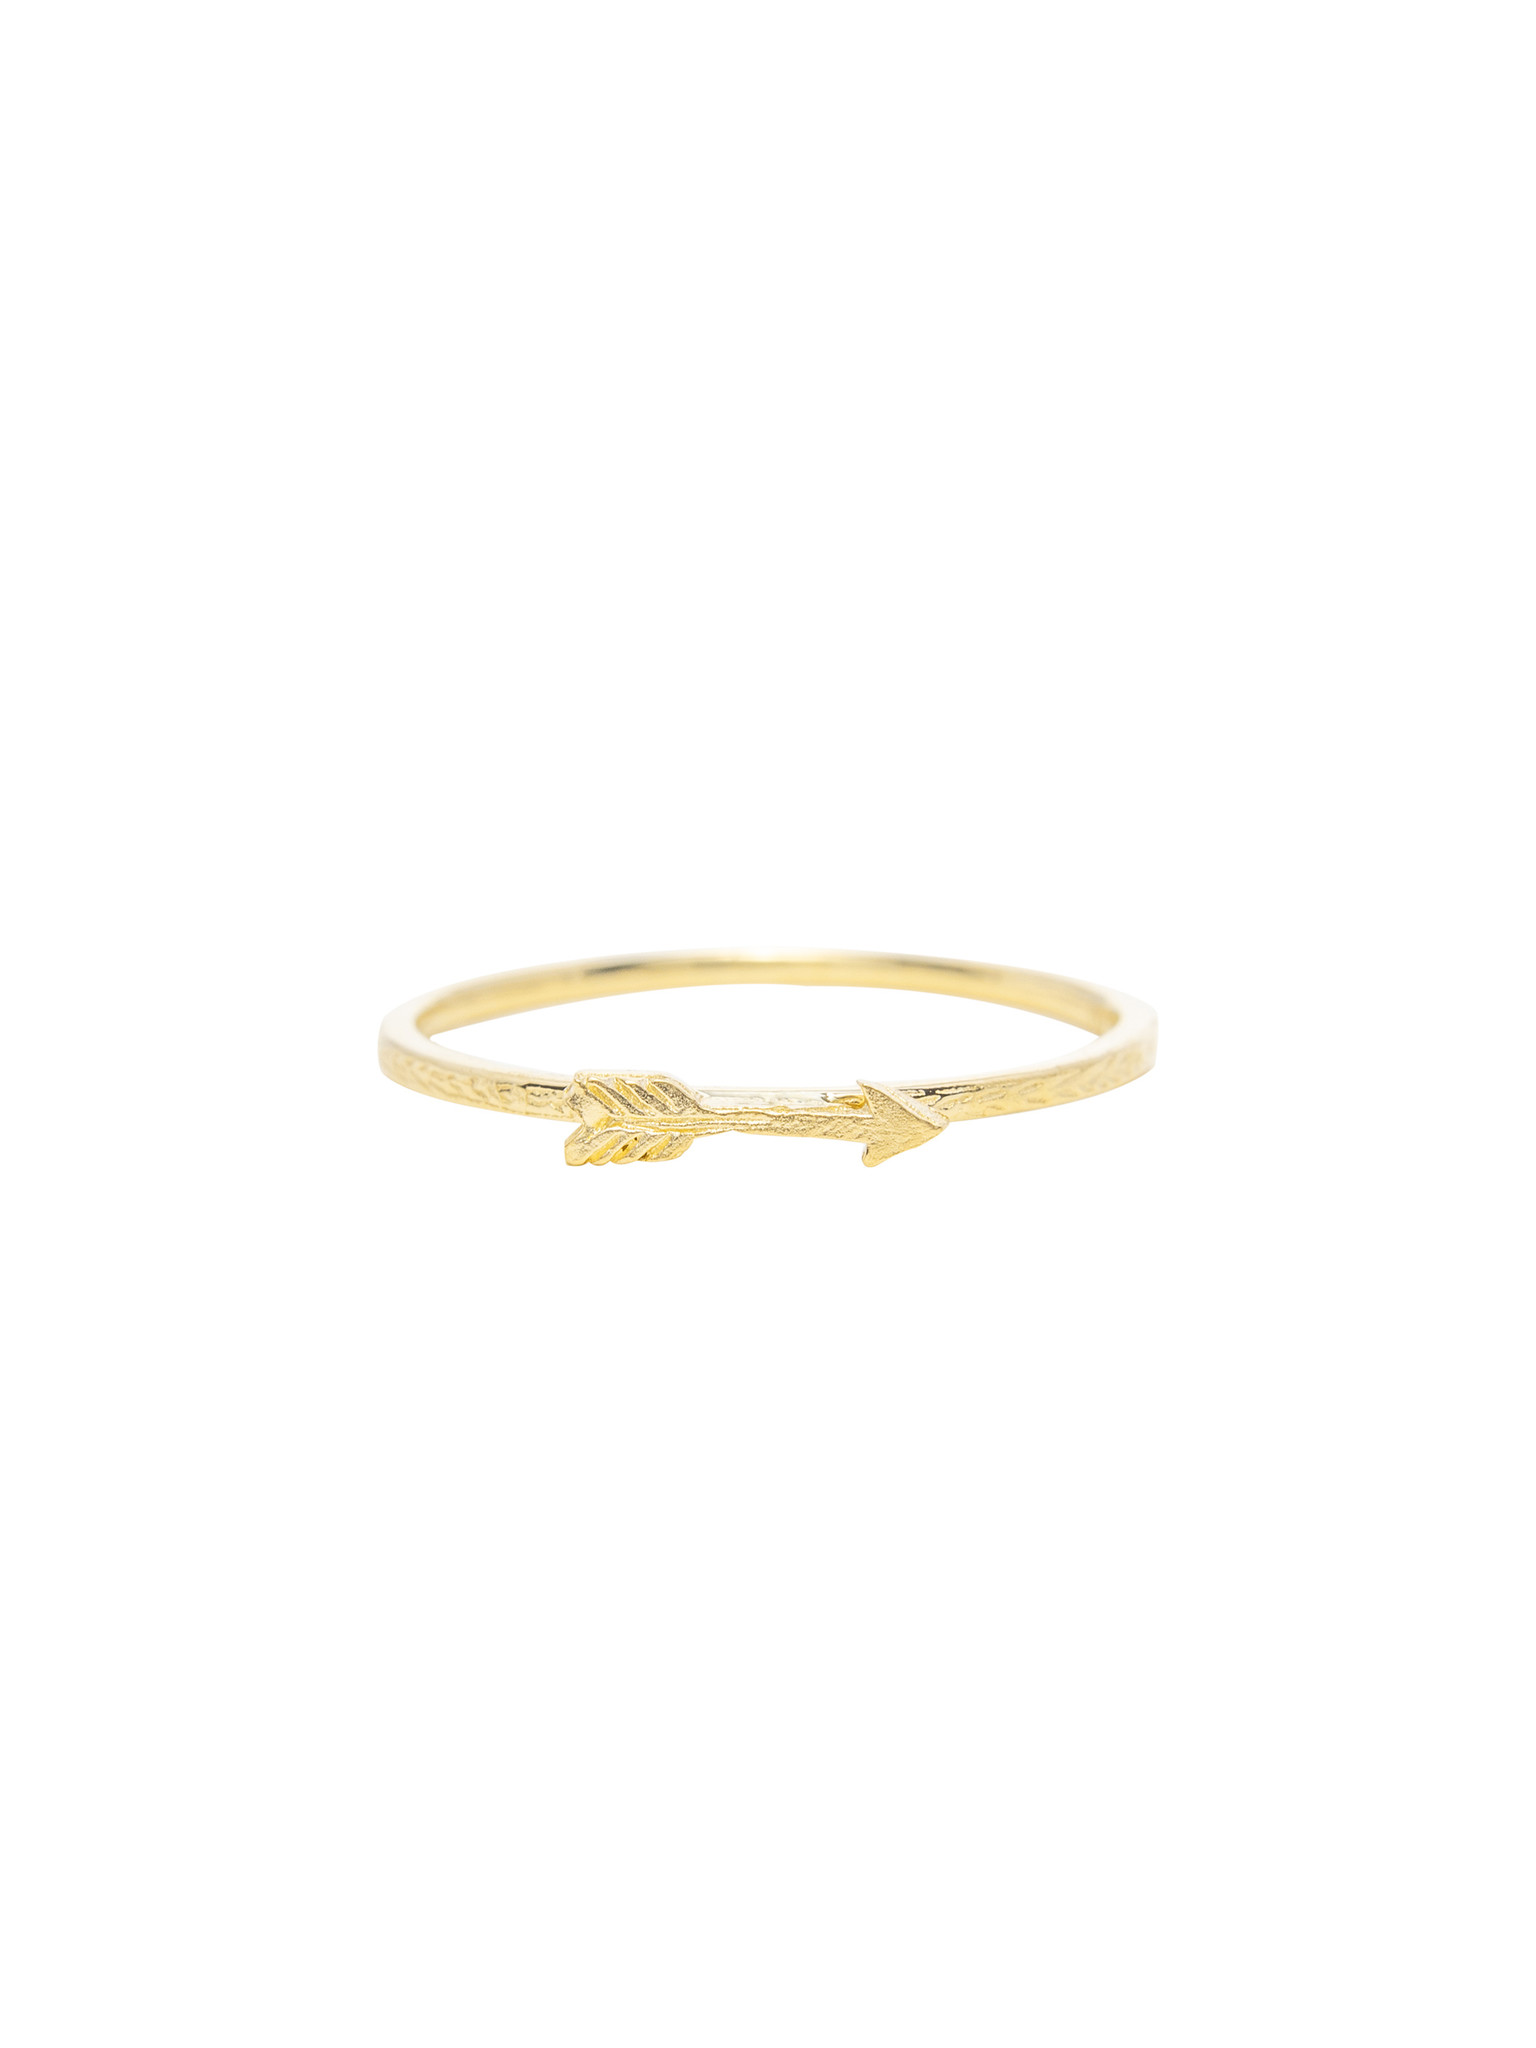 Victoria Cunningham - 14K Gold Arrow Ring - Alhambra | Women's Clothing  Boutique, Seattle